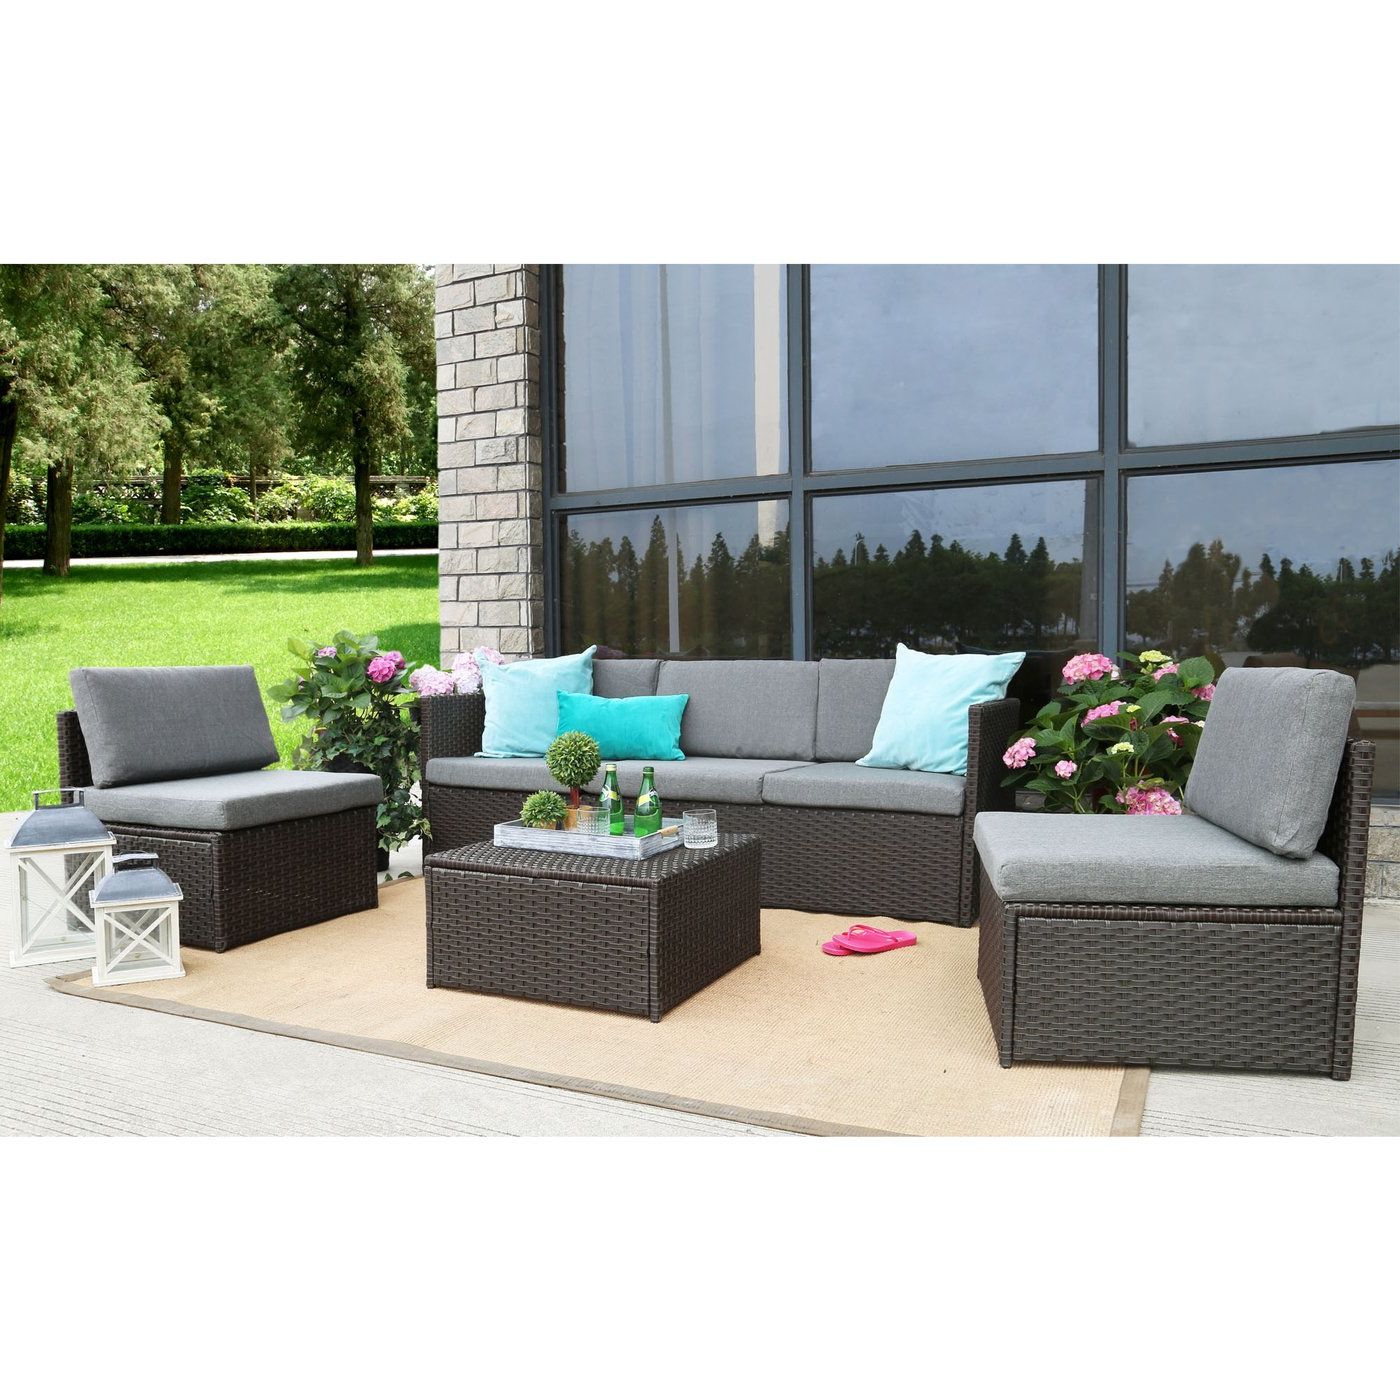 4 Piece Outdoor Seating Patio Sets Within Popular Baner Garden K16ch 4 Piece Complete Outdoor Furniture Seating Patio (View 8 of 15)